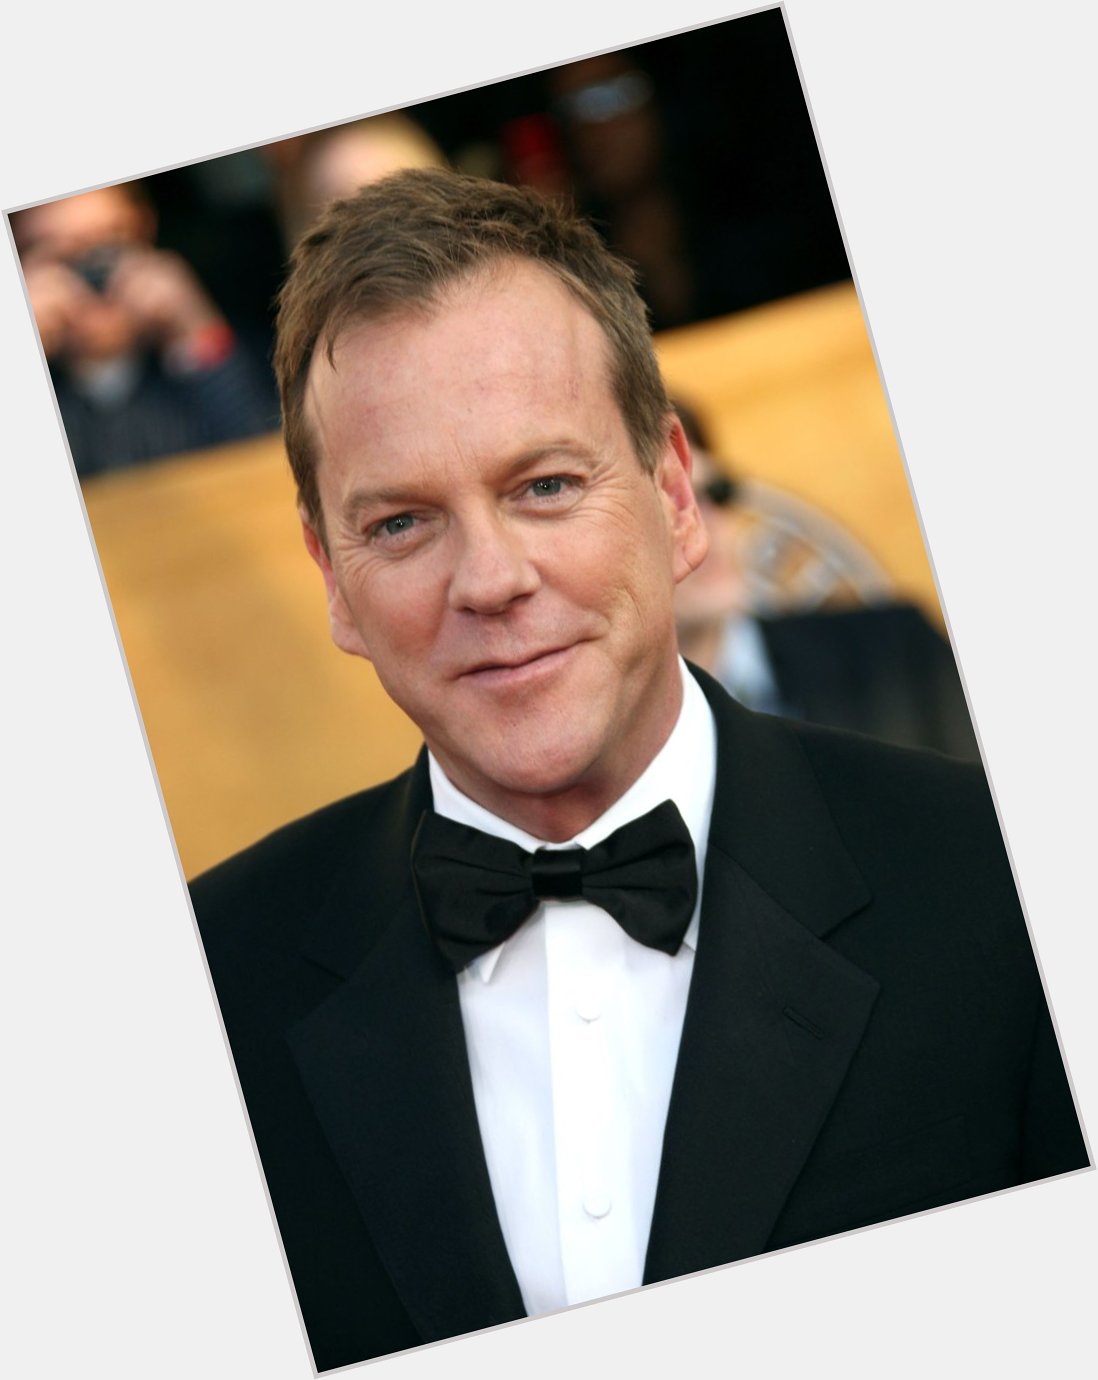 Happy Birthday Kiefer Sutherland, Actor turns 49 today. message your top 5 Kiefer Sutherland movies. 